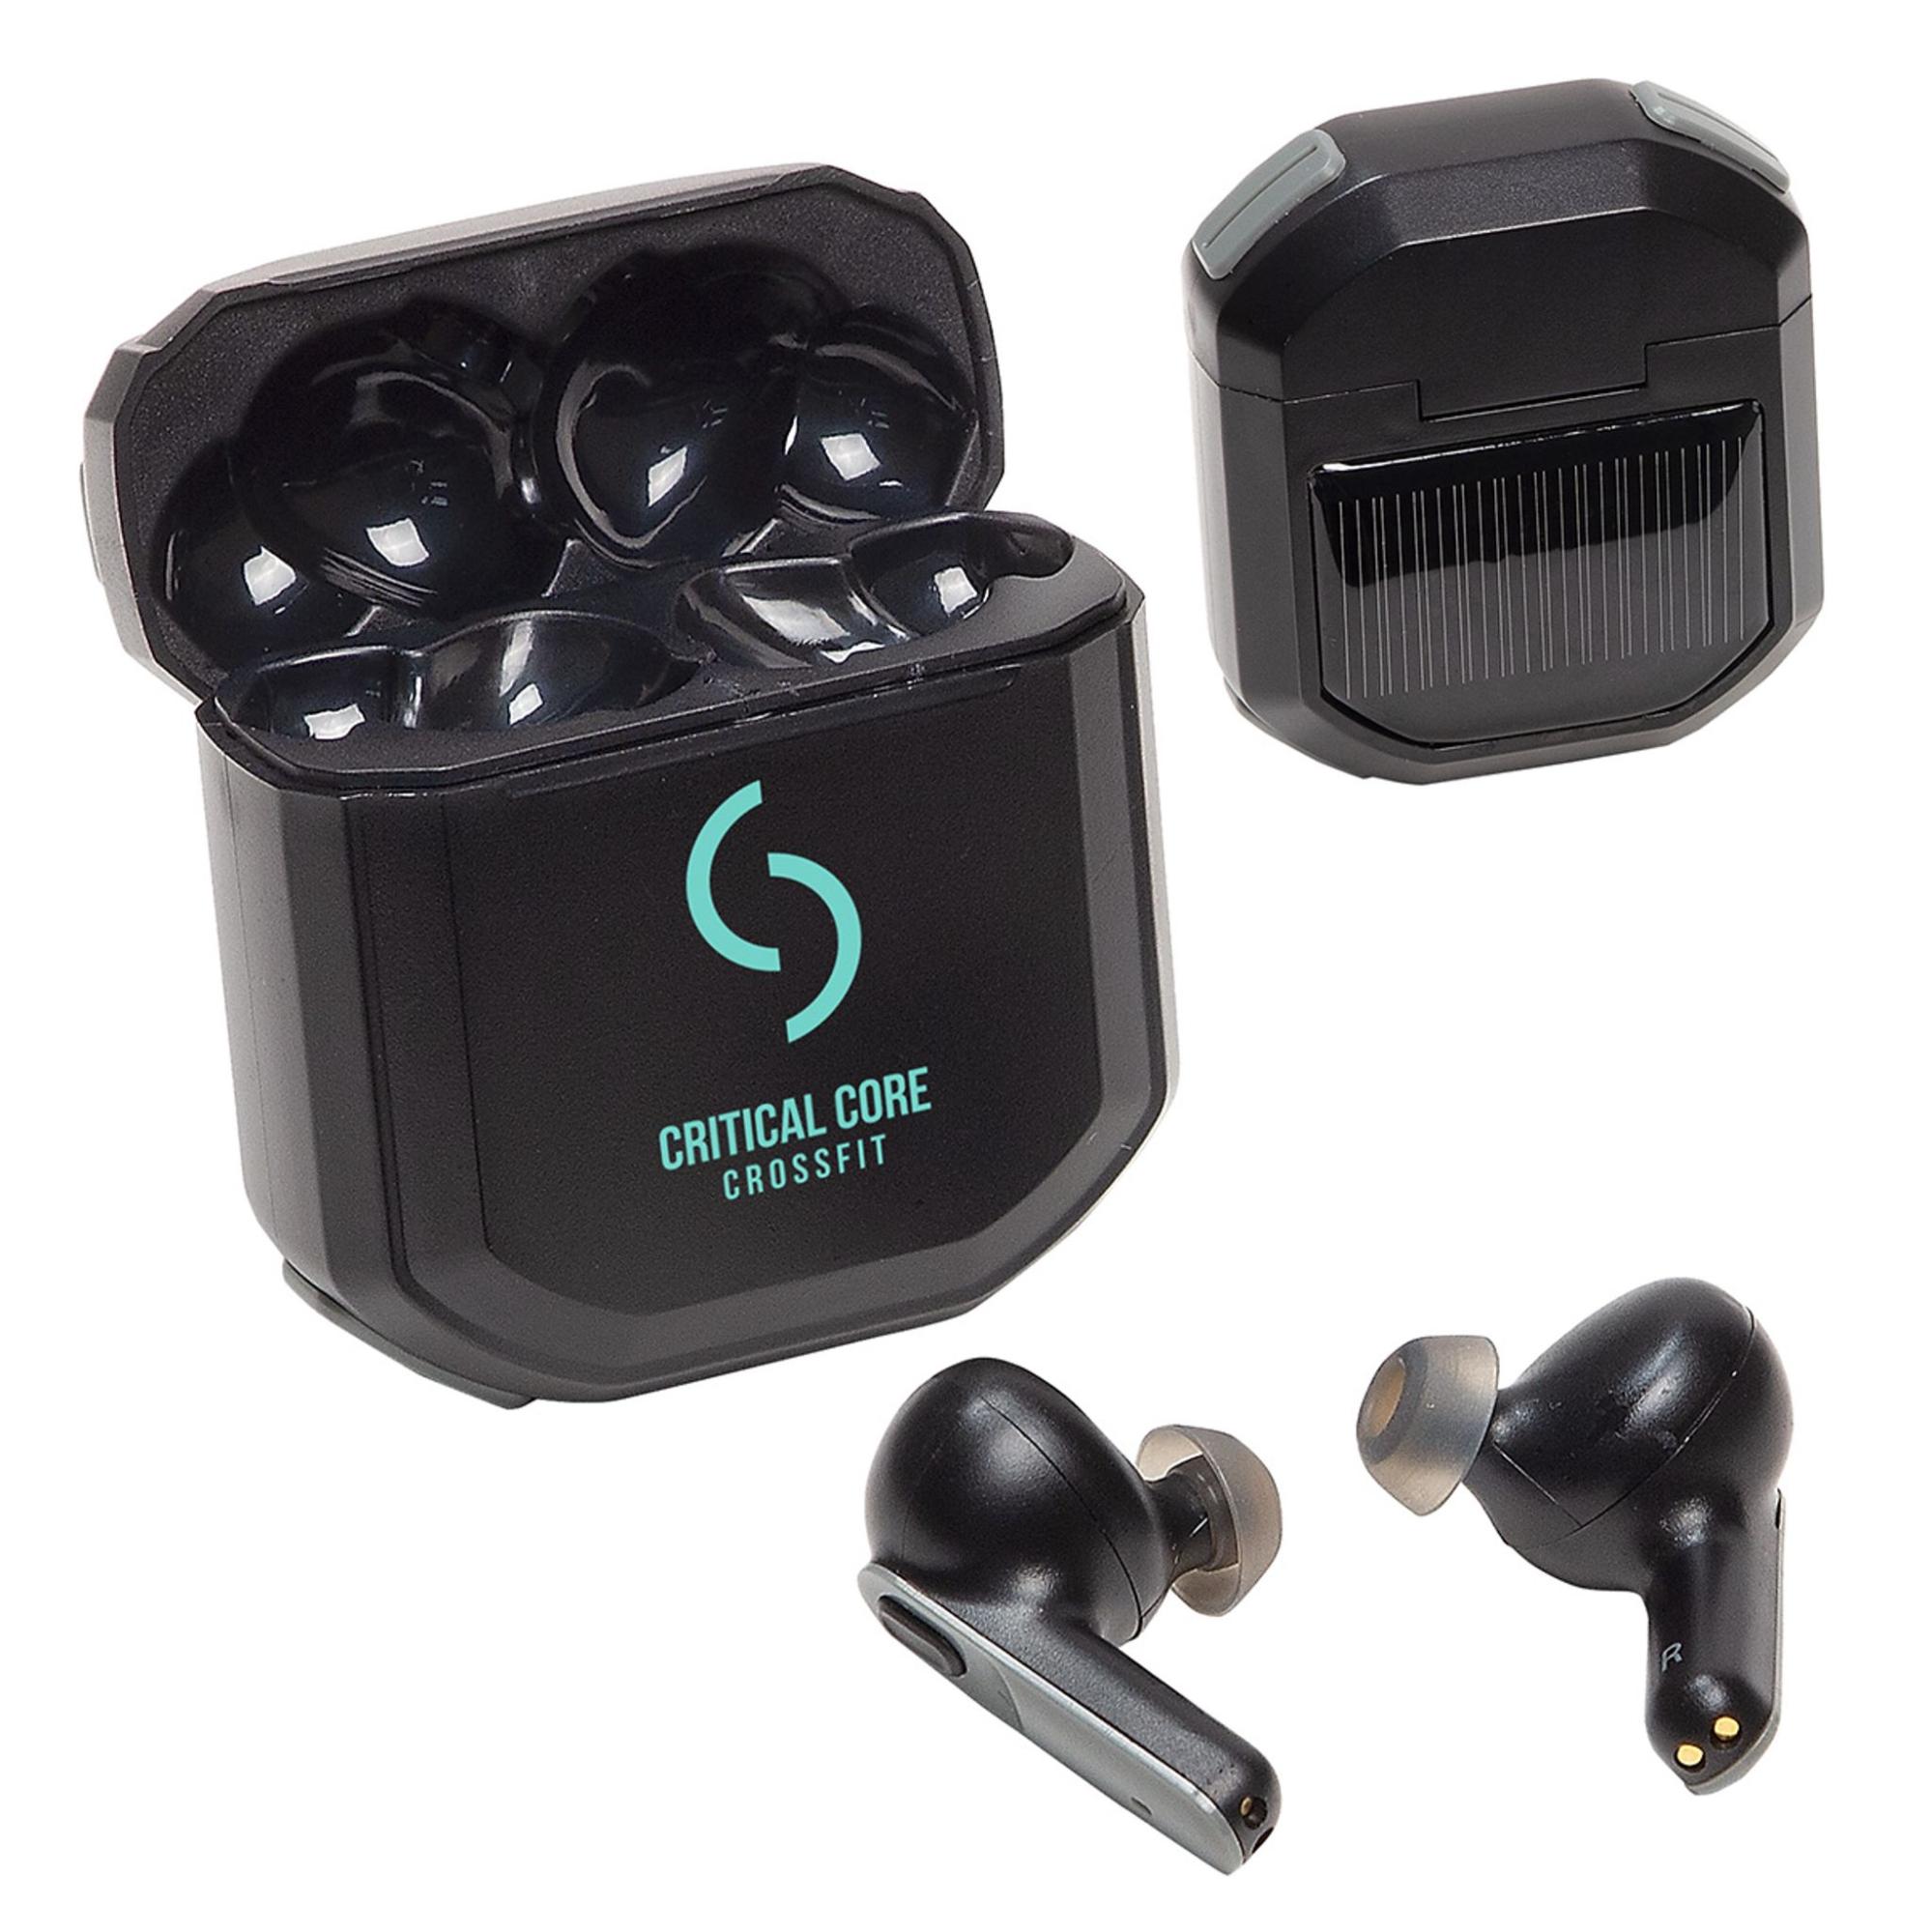 black-colored wireless earbuds with solar charging box